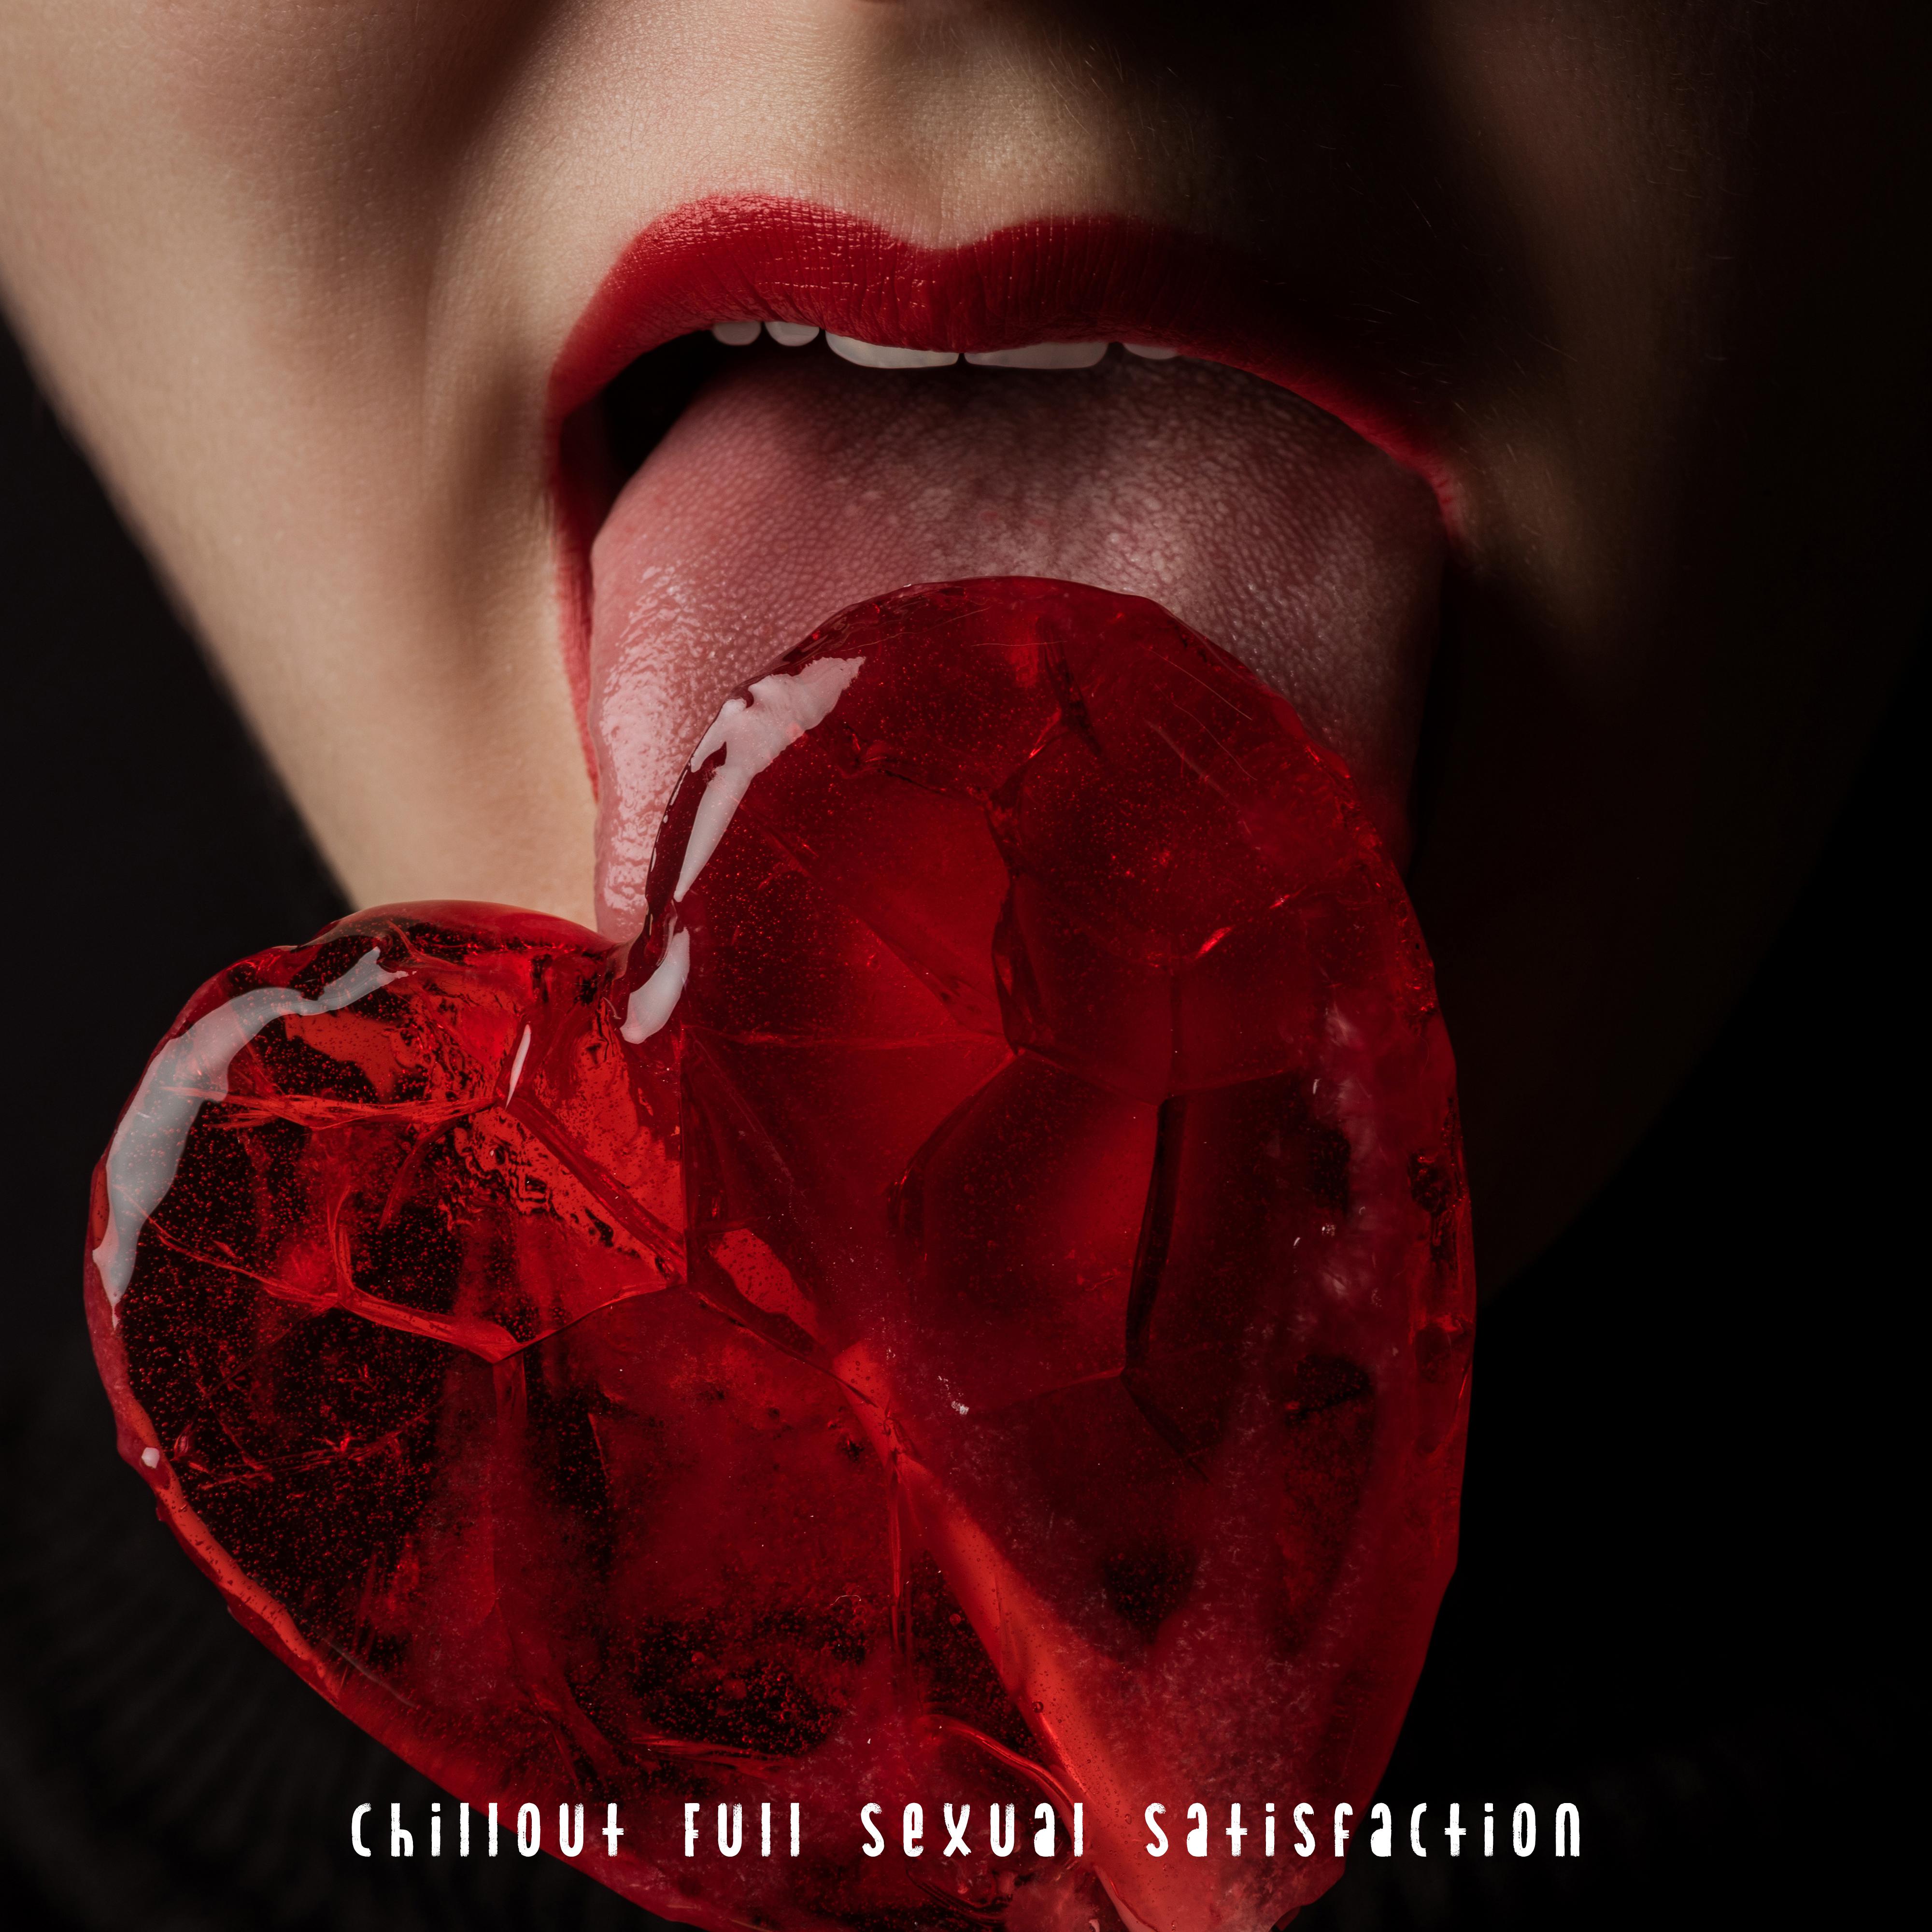 Chillout Full ****** Satisfaction: Compilation of Dirty Chill Out Music Created for ***, Erotic Beats & Melodies Full of Passion & Lust, Tempring Lap Dance in **** Lingerie